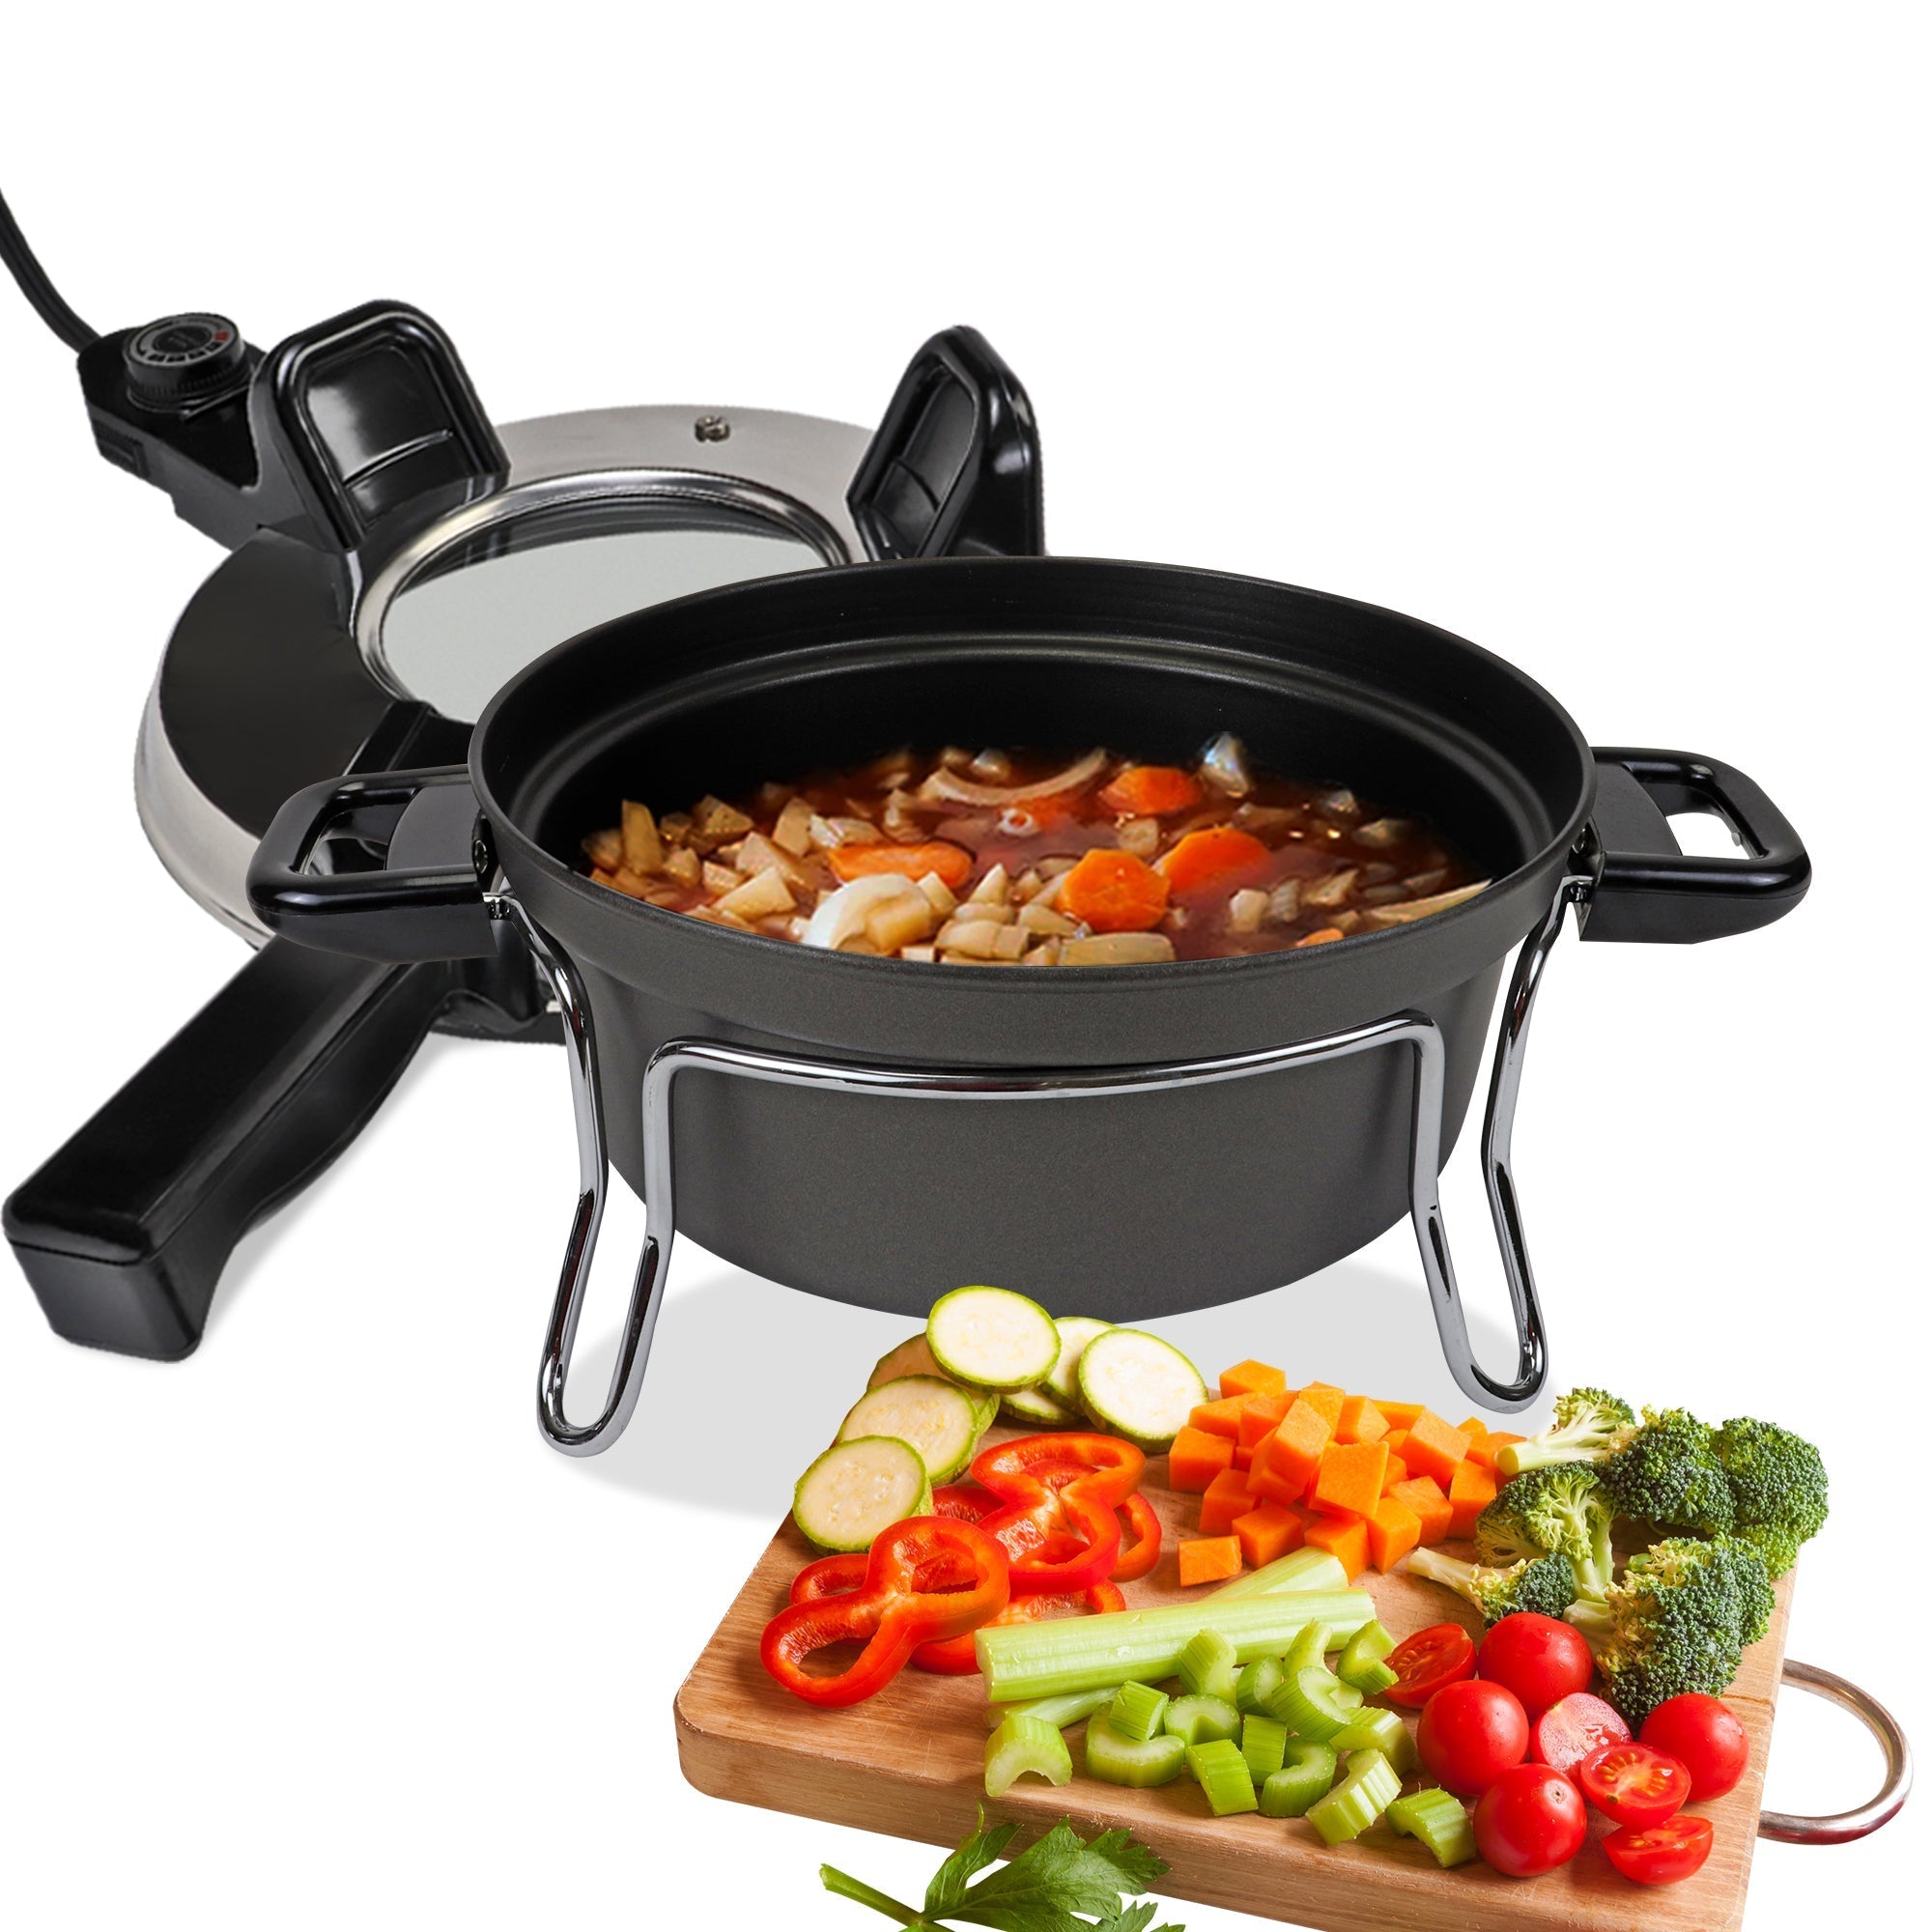 Product shot of Czech cooker electric oven on a white background. The cooking pot is on its stand and filled with stew, the lid is behind it, and a cutting board with assorted chopped vegetables is in front 